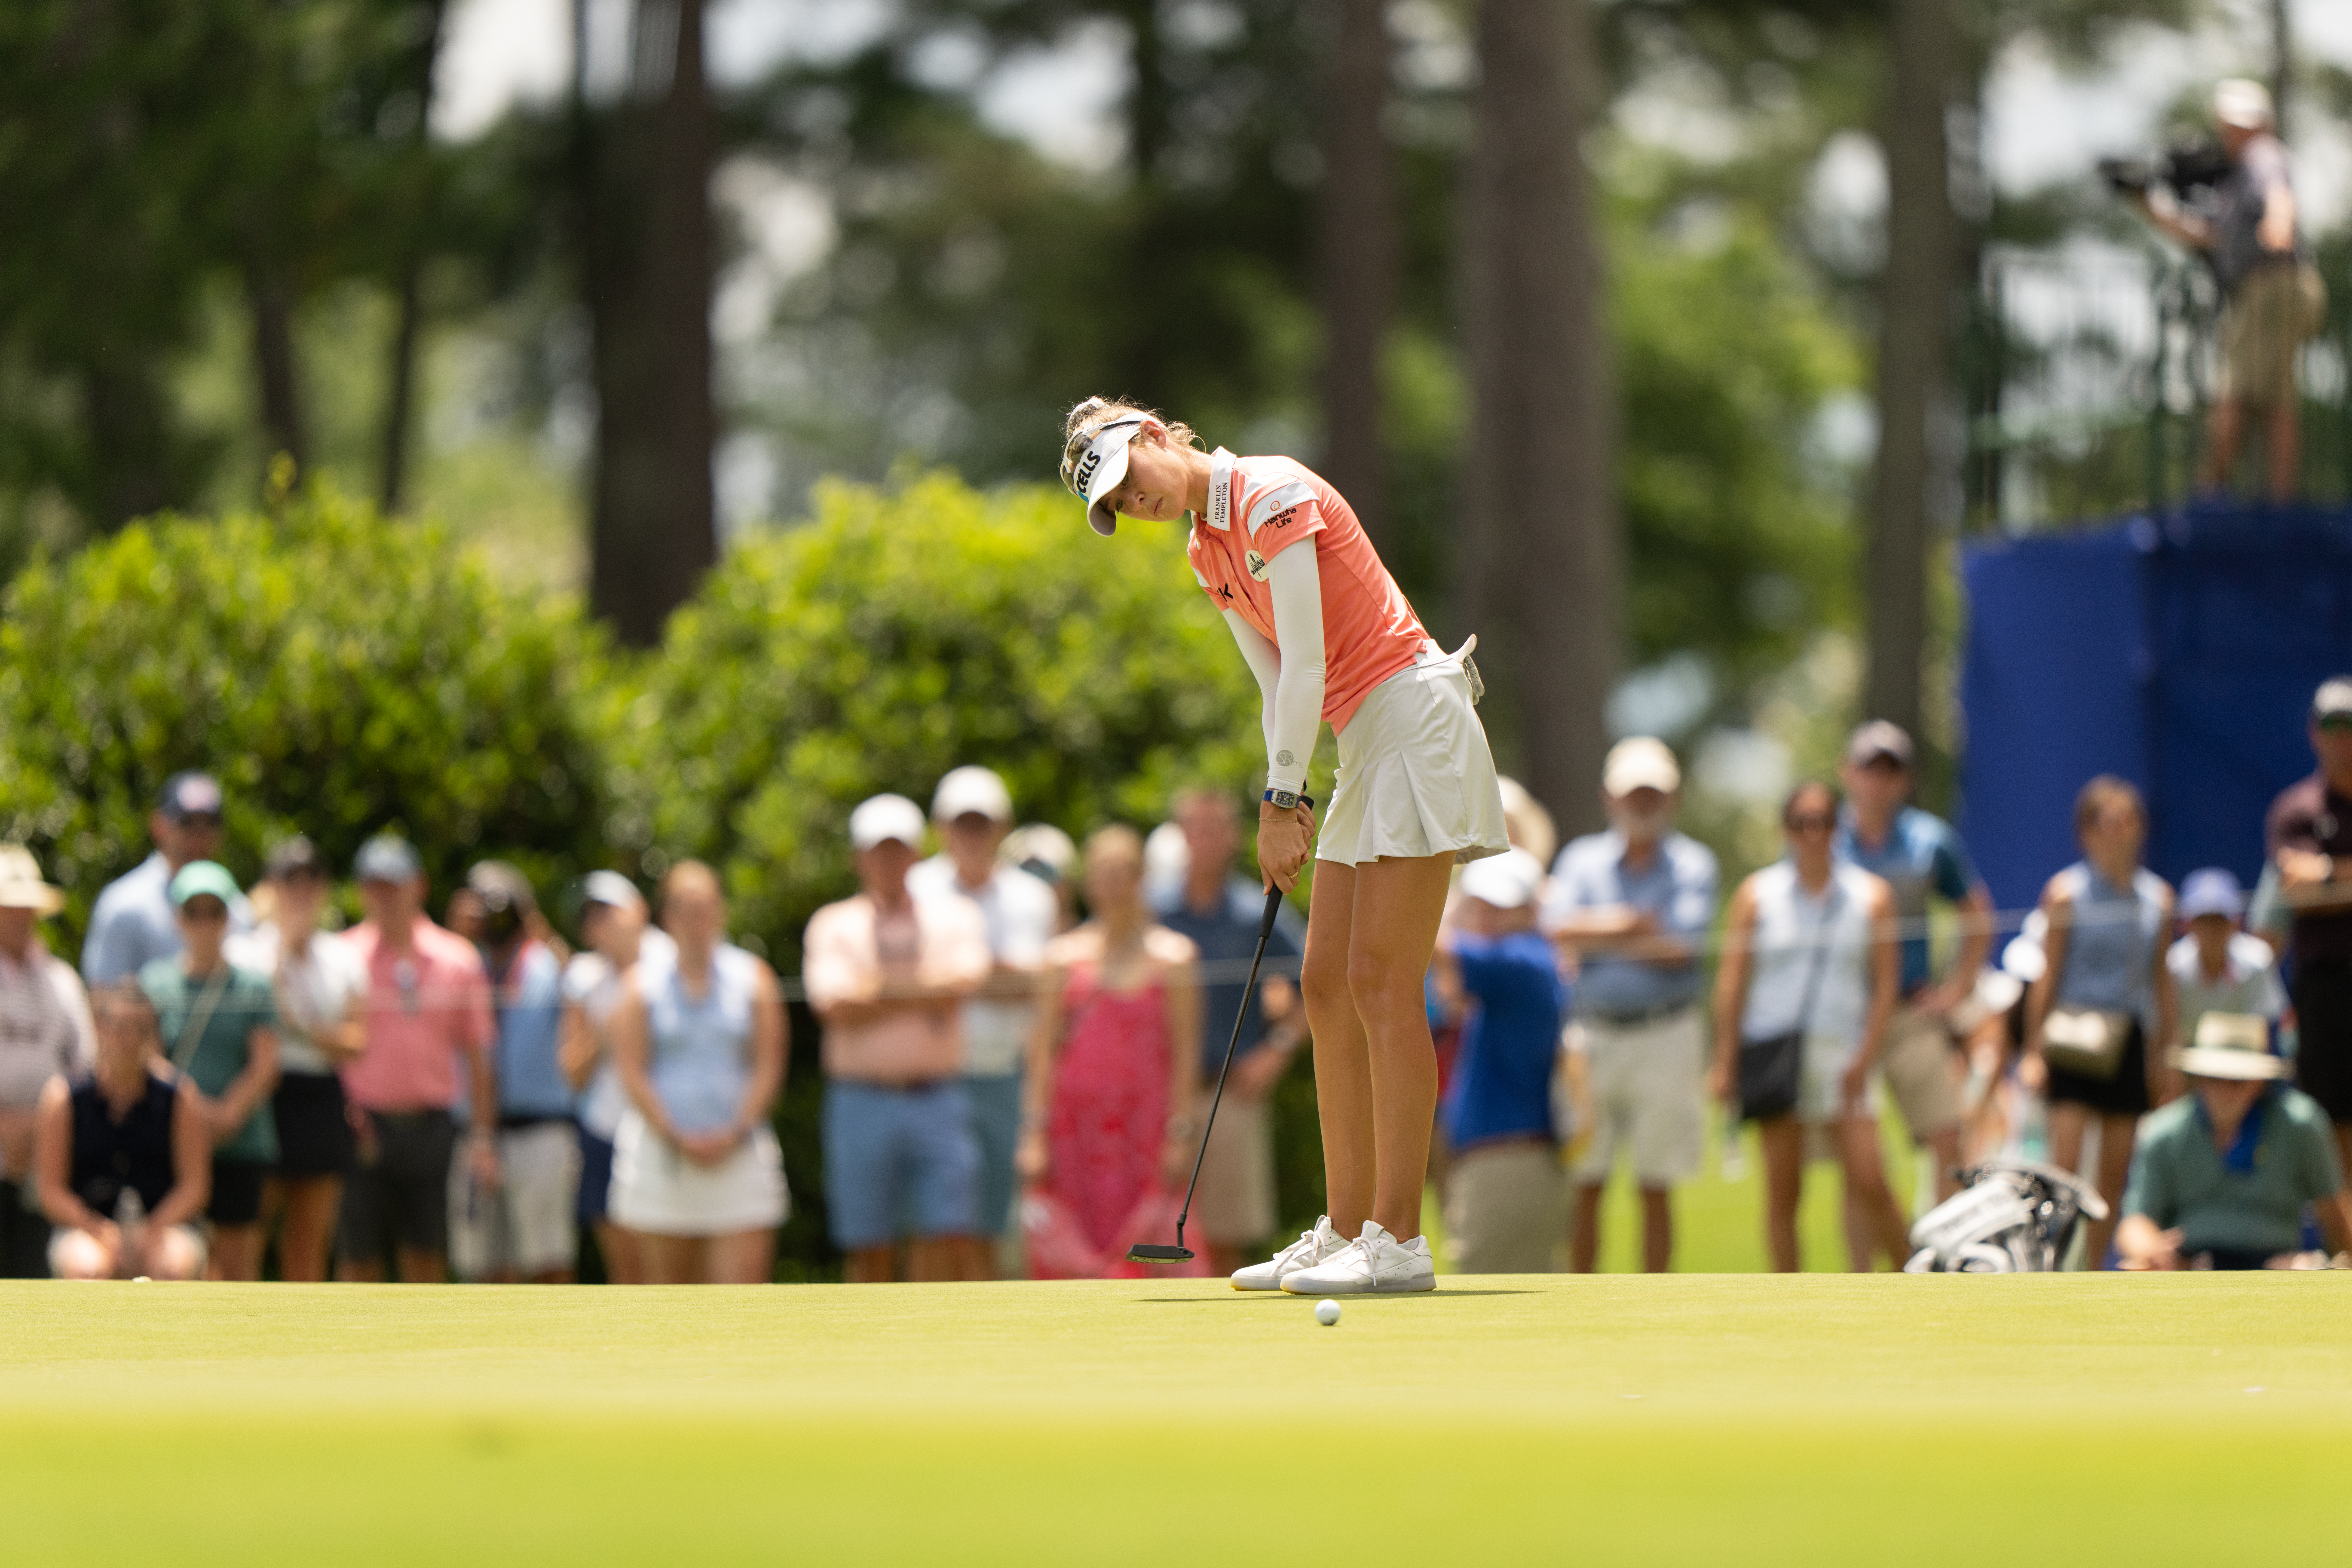 Nelly Korda makes her putt on the 14th hole during the third round for the 2021 KPMG Women's Championship at the Atlanta Athletic Club 